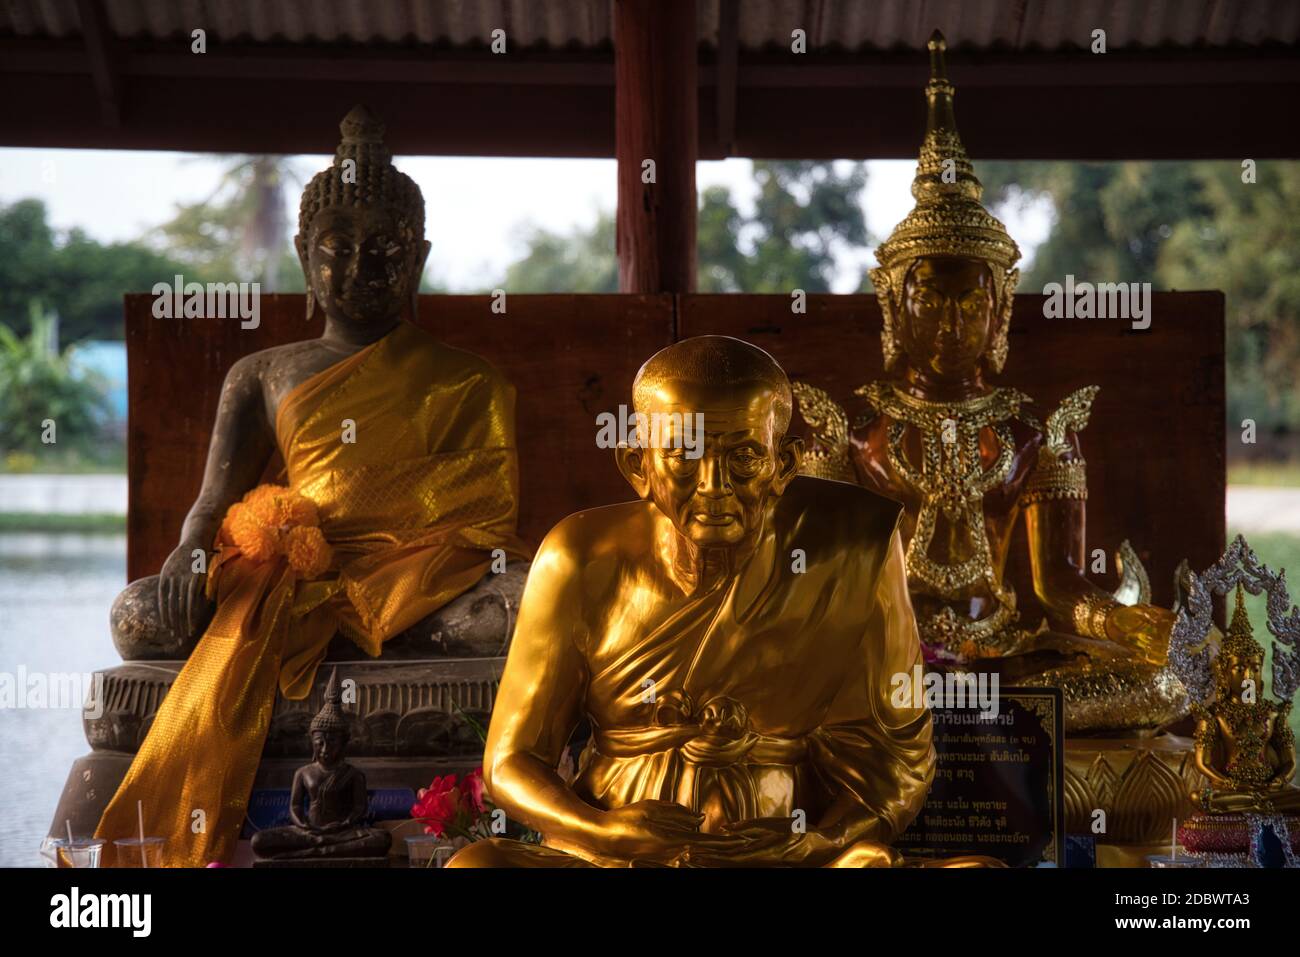 Three beautiful golden Buddha statues sitting and meditating outside in front of a temple in Hua Hin Thailand. Stock Photo